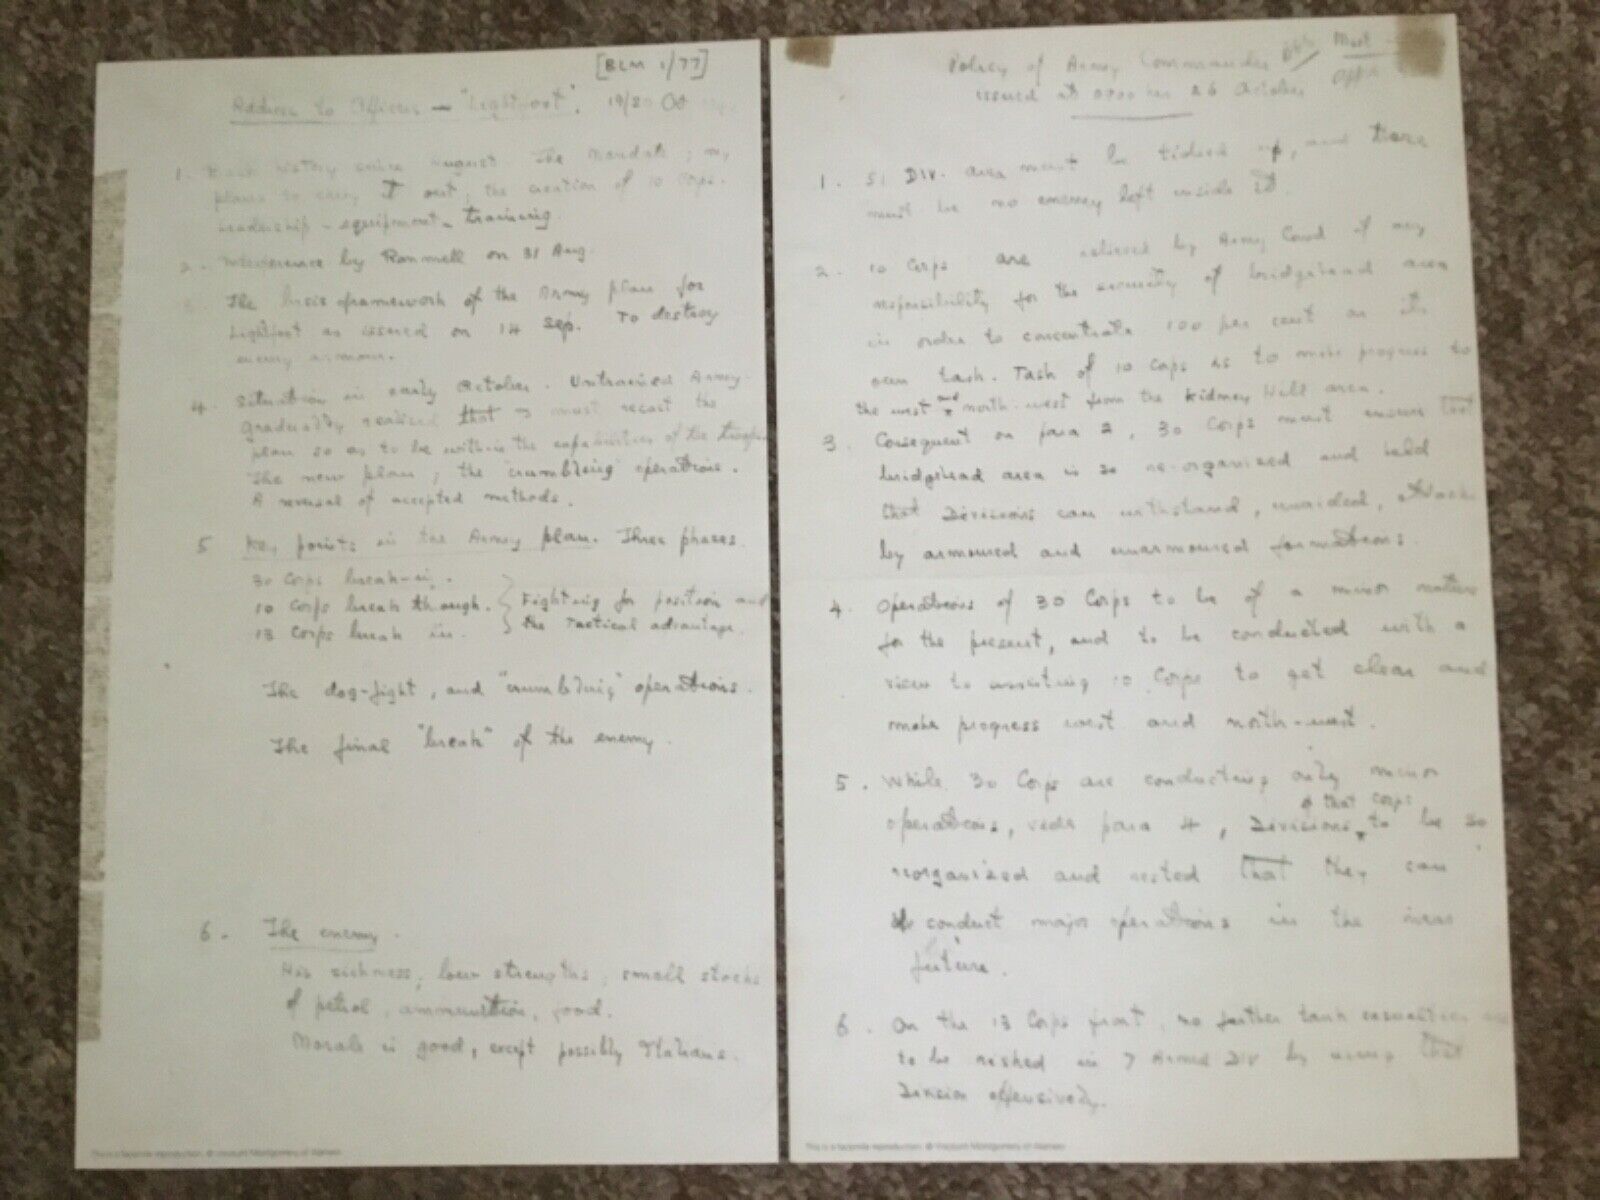 1942 WWII ORDERS OF GENERAL BERNARD MONTGOMERY FOR 3RD DAY OF 2ND ALAMEIN BATTLE